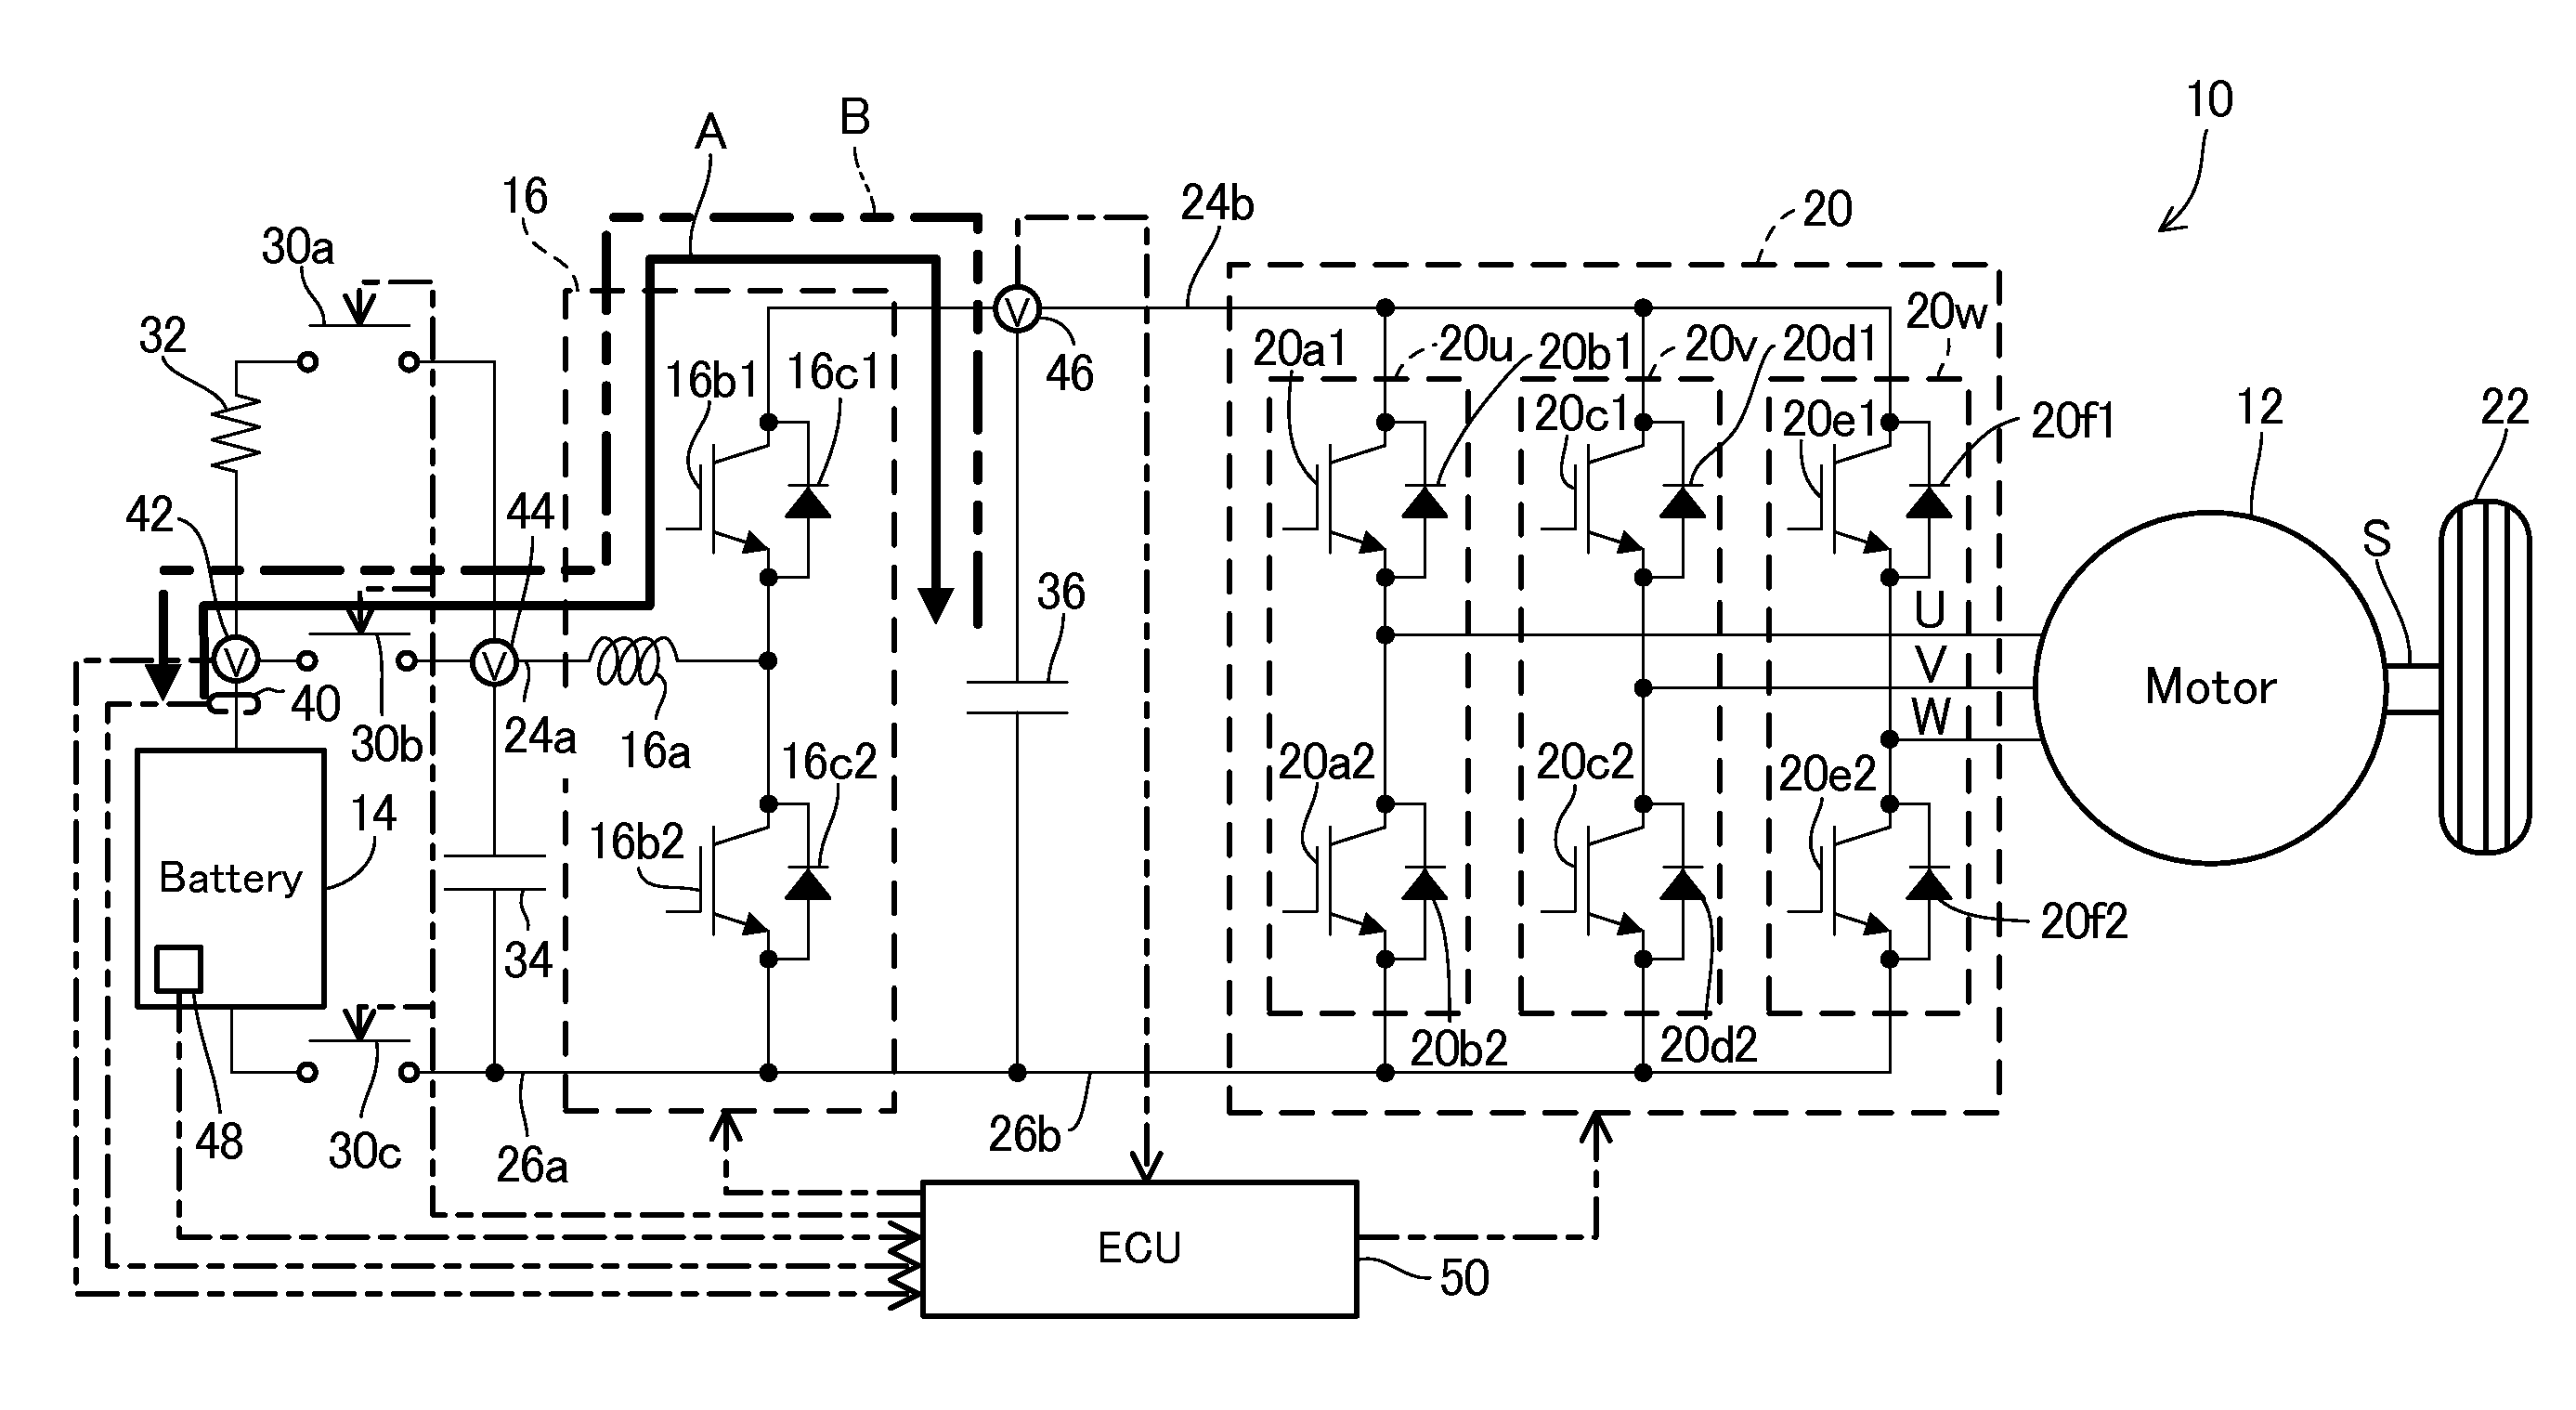 Battery heating apparatus for vehicle